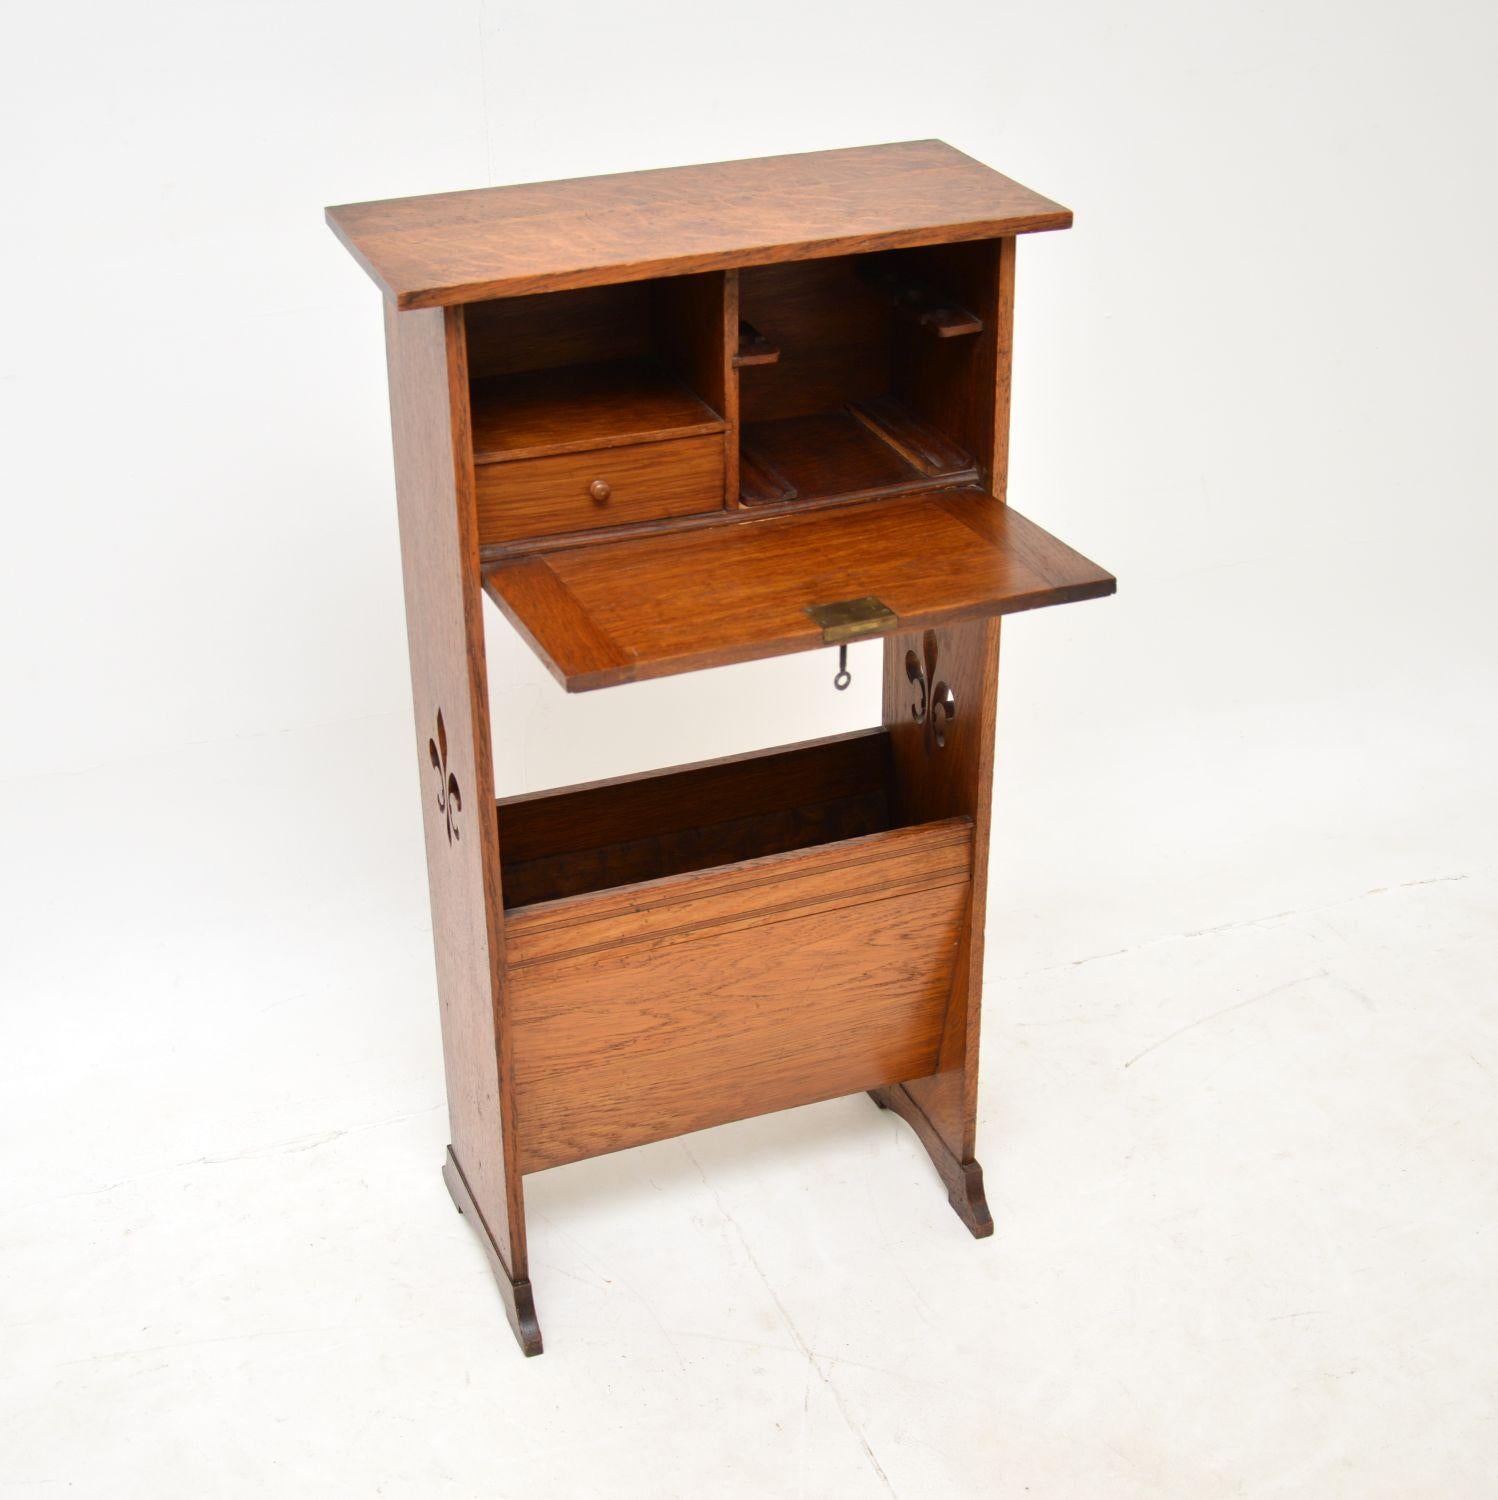 A beautiful and petite antique Arts & Crafts period writing bureau in oak. This was made in England, it dates from around 1880-90’s.

The size of the pull down work space is very small, meaning it’s probably not great for working at, but it is still